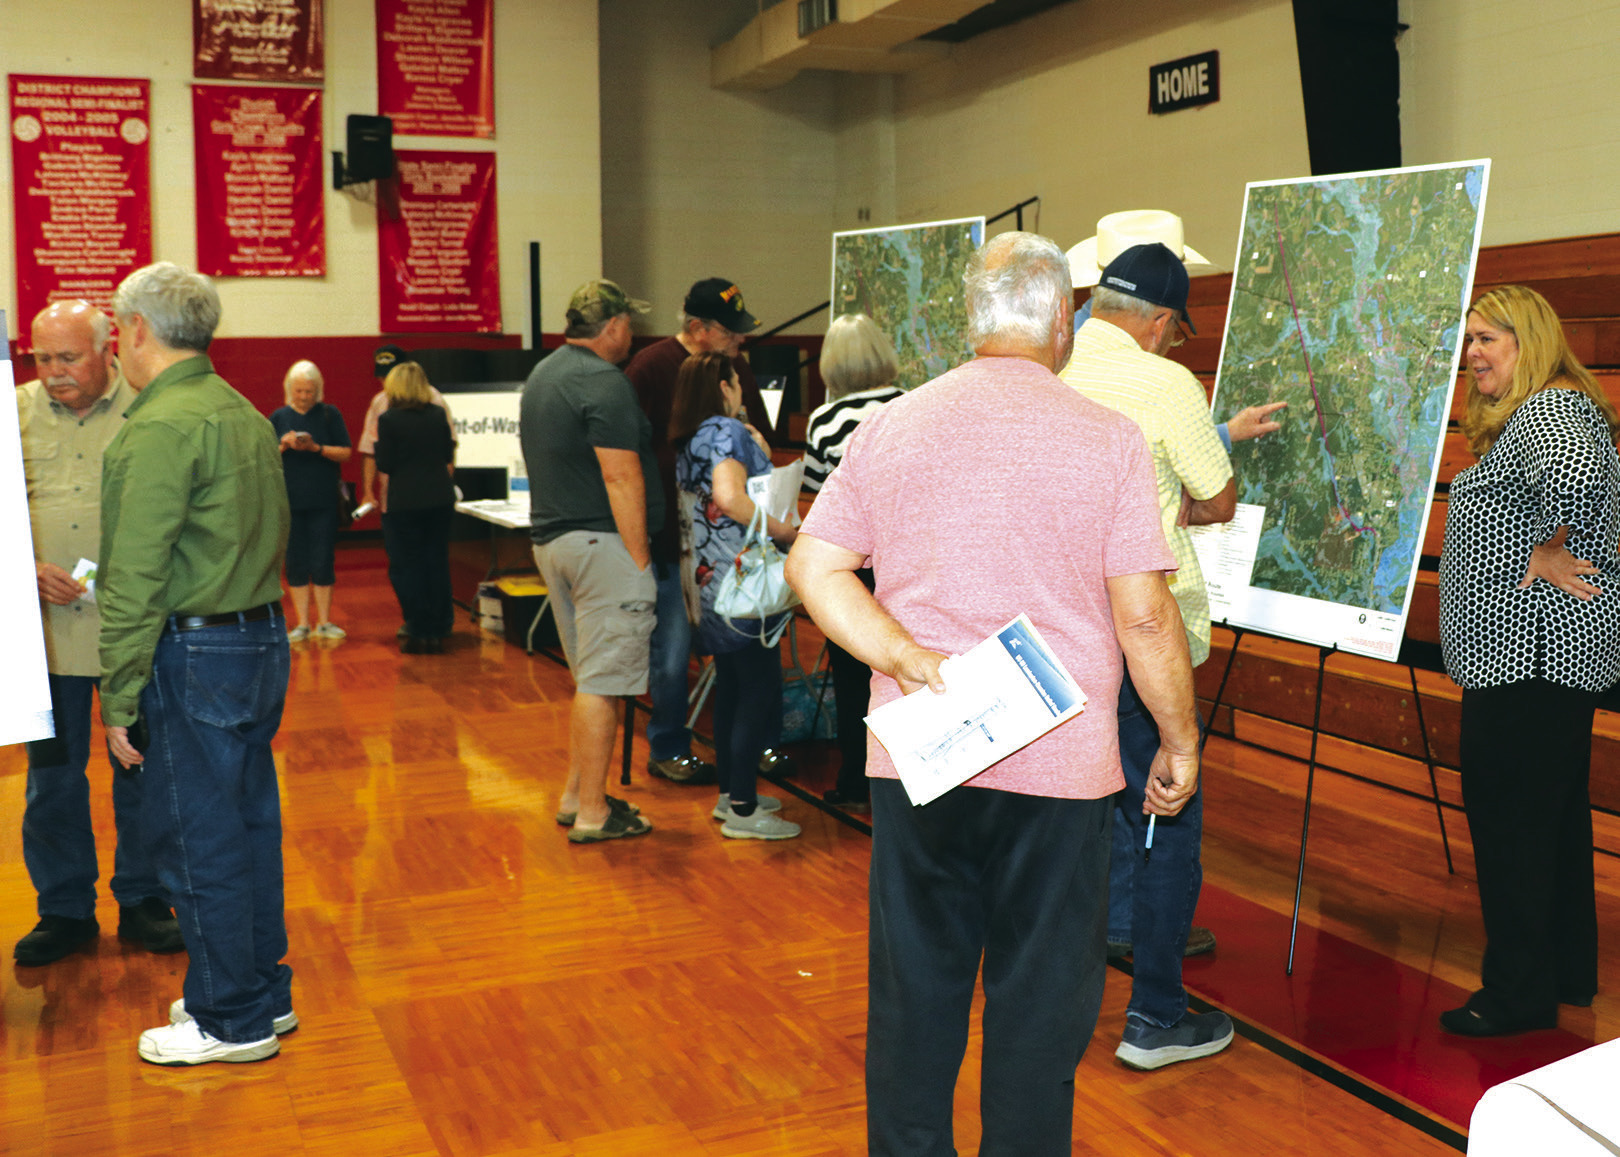 Various maps, drawings and other information was placed on walls or laid on tables at the TxDOT meeting on Tuesday night,April 2, at the Kountze High School gym.TxDOT employees were also on hand to answer questions. Danny Reneau photo